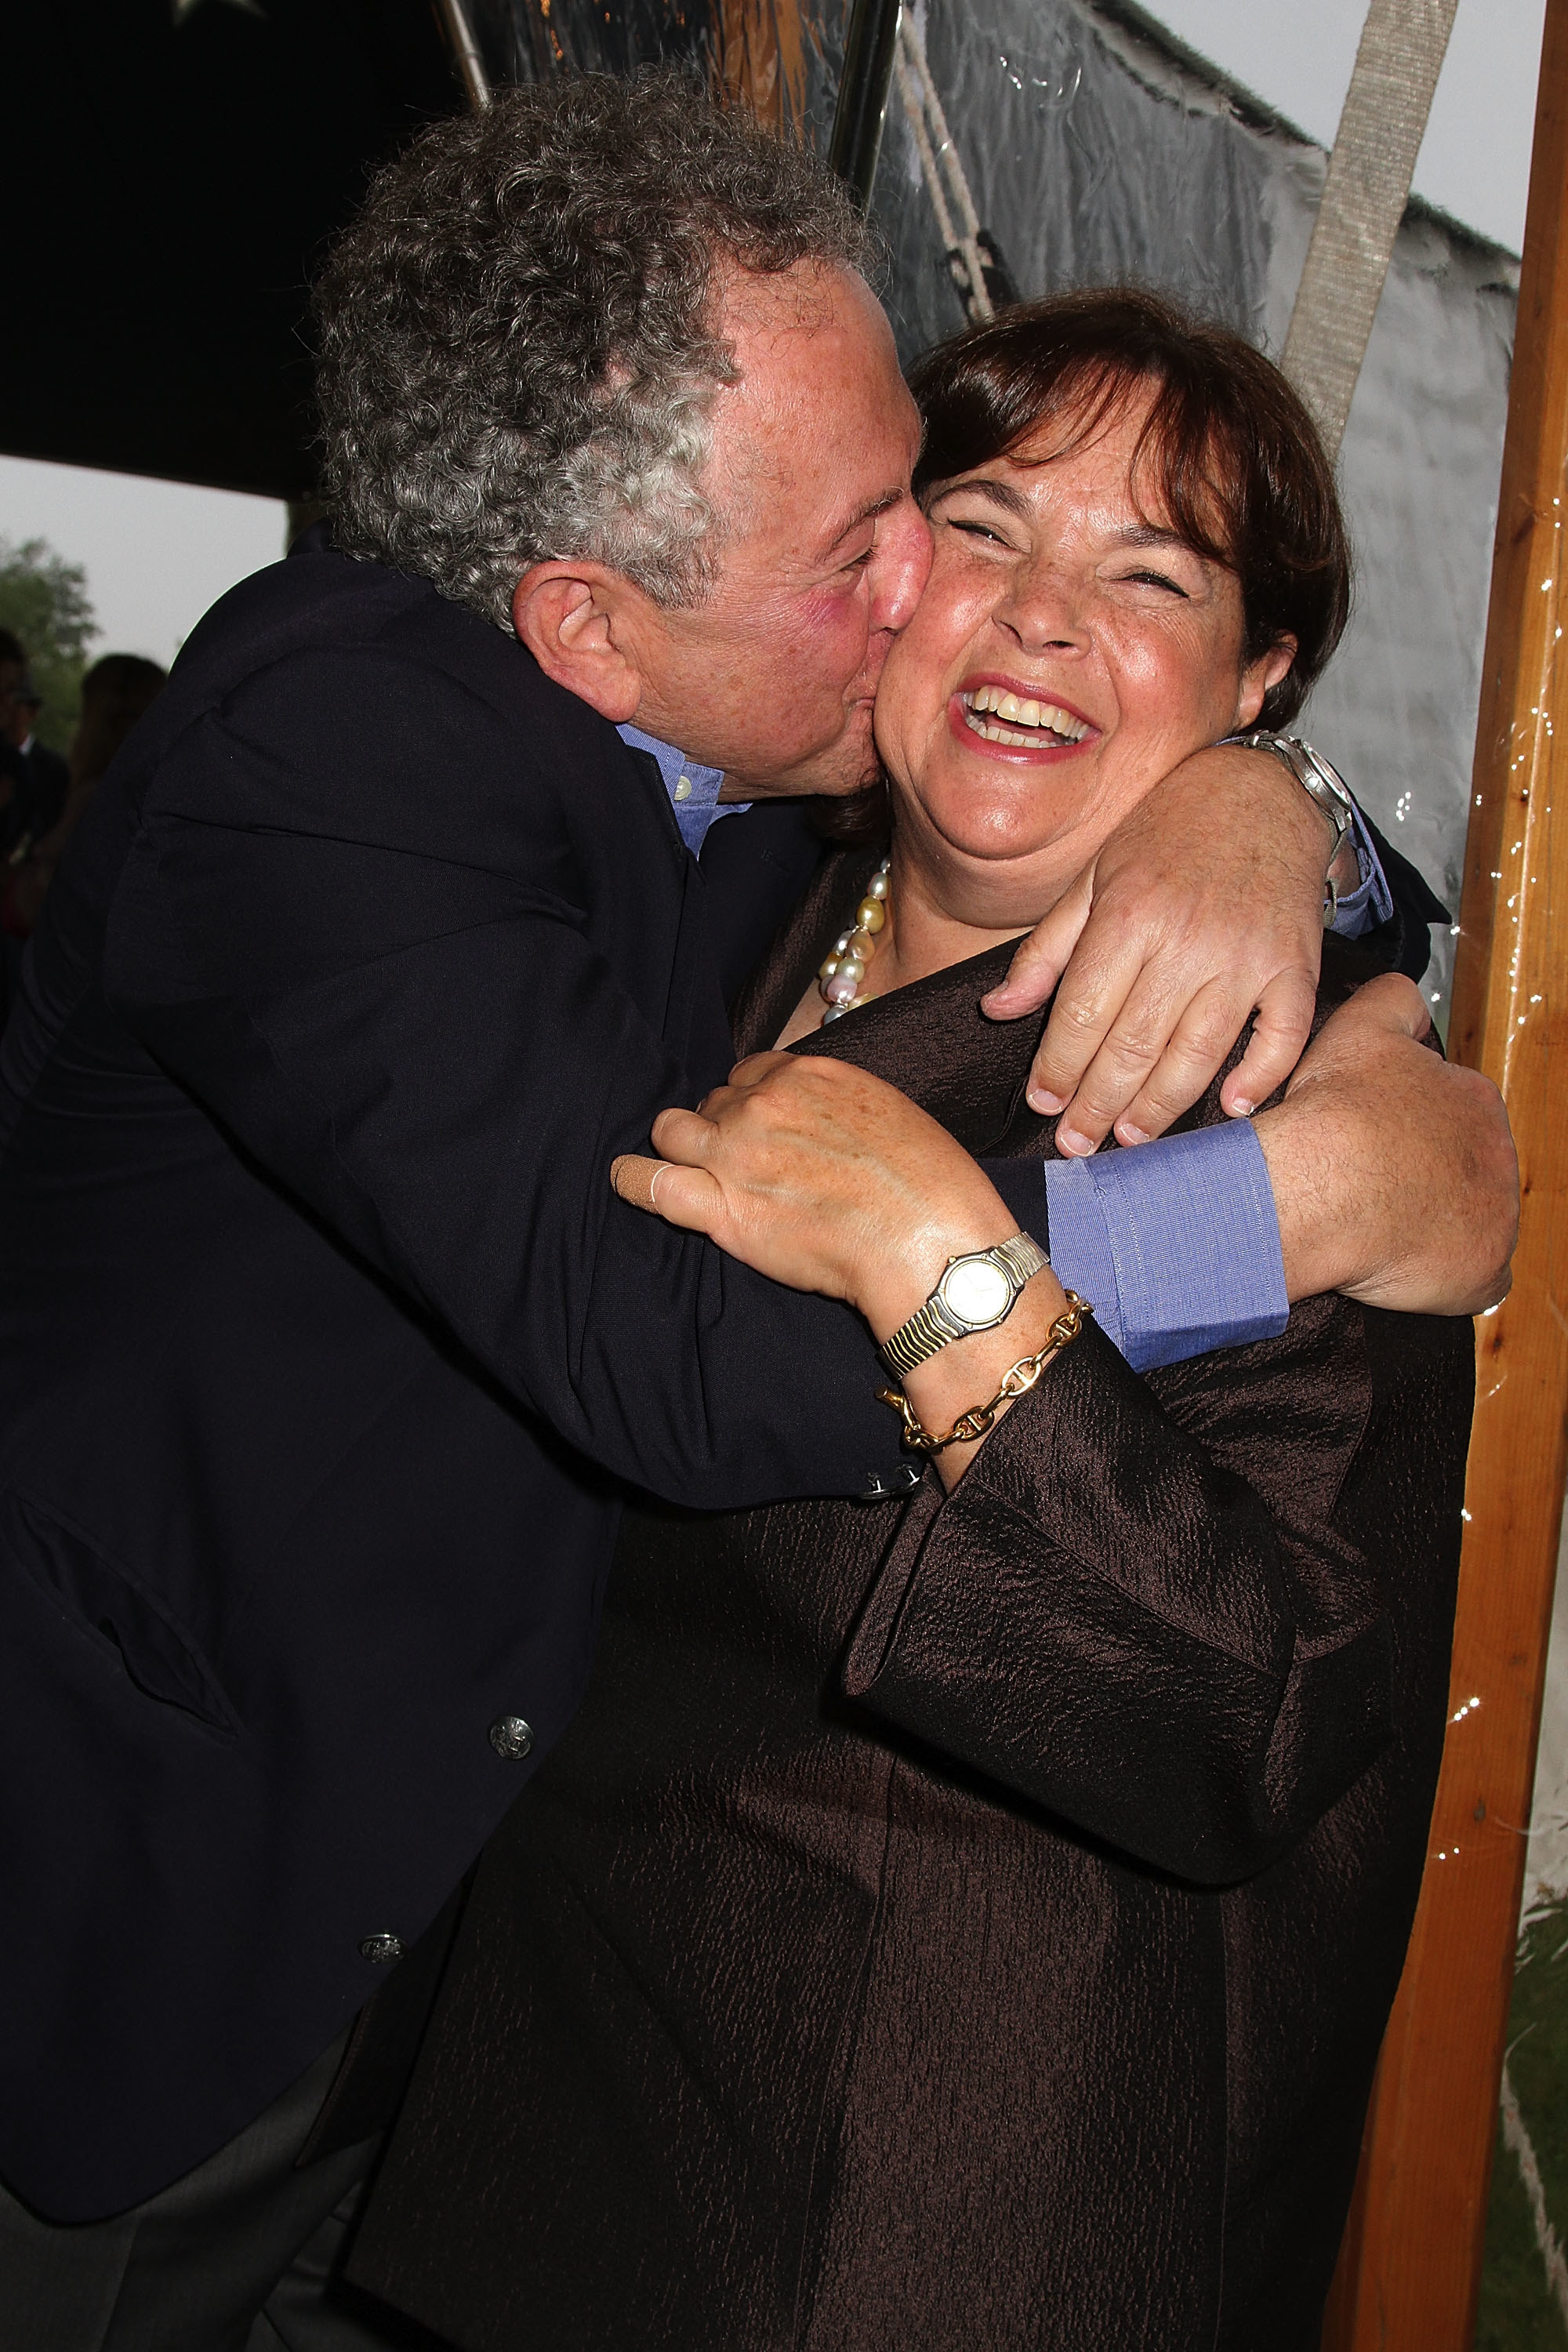 Jeffrey Garten and Ina Garten attend the &quot;Barefoot Under the Stars&quot; event at the Wolffer Estate Vineyard on June 25, 2011 in Sagaponack, New York